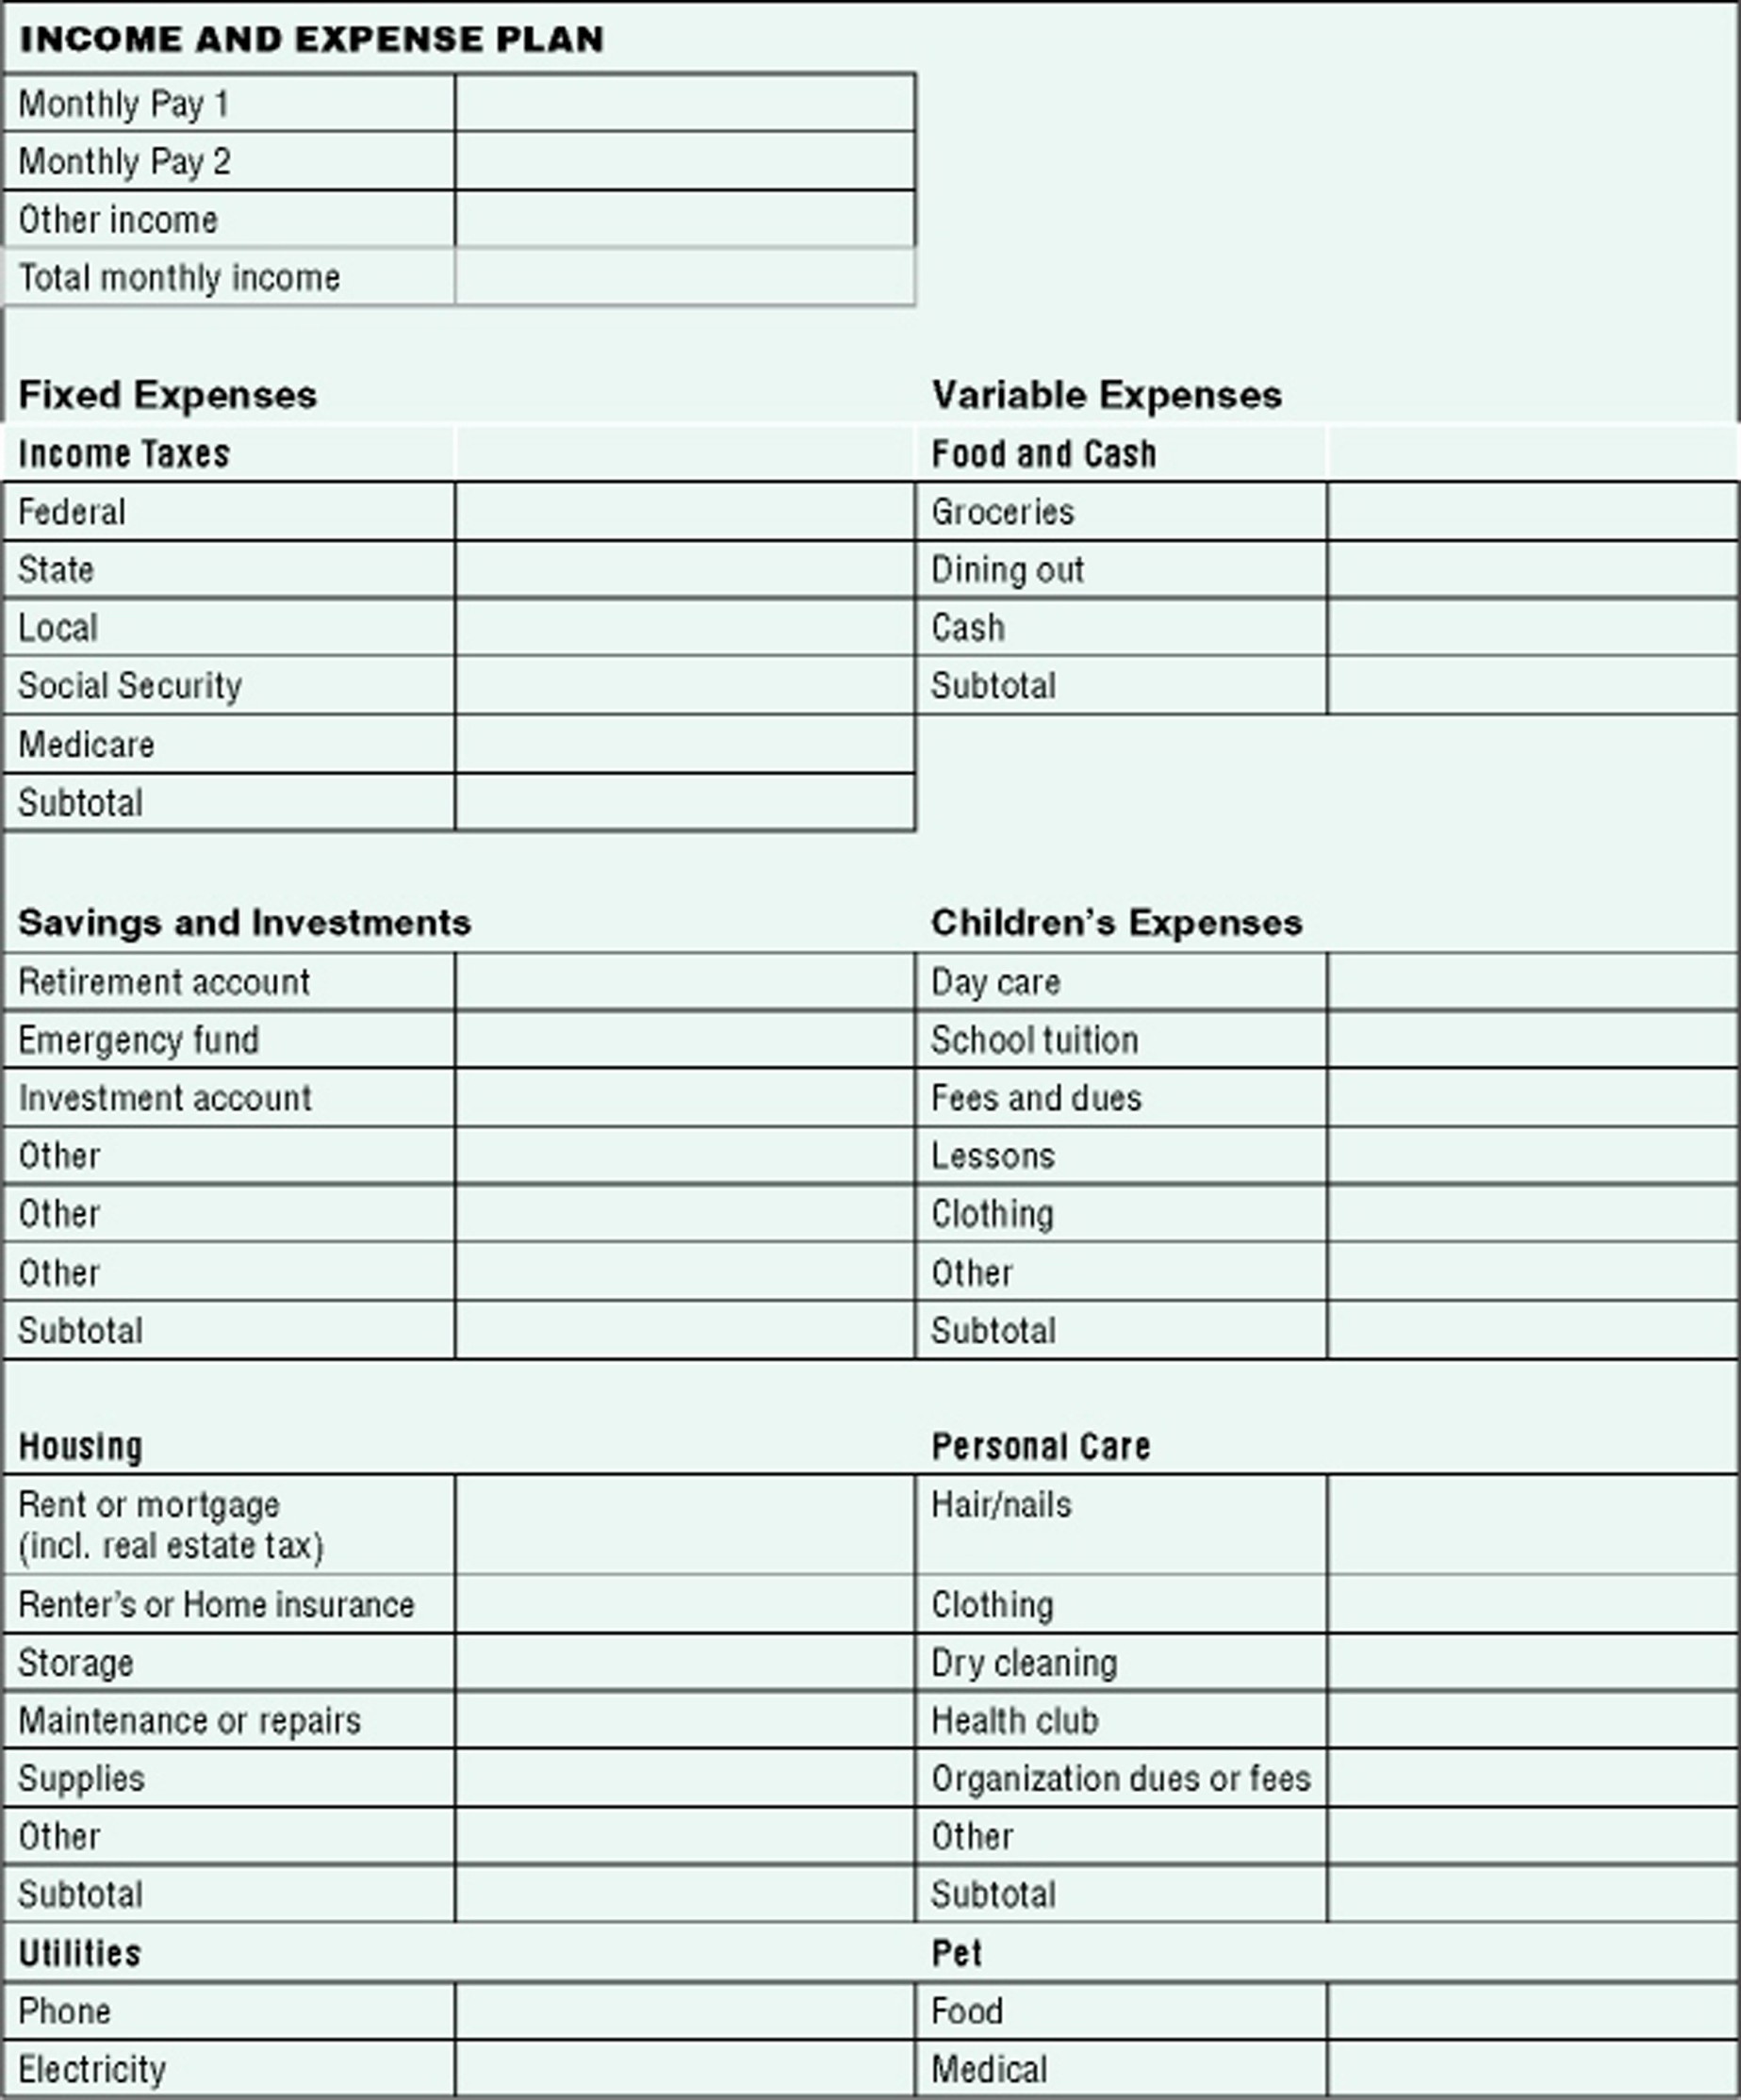 Year End Financial Statement Template Lovely Year End Financial Statement forms In E and Expense